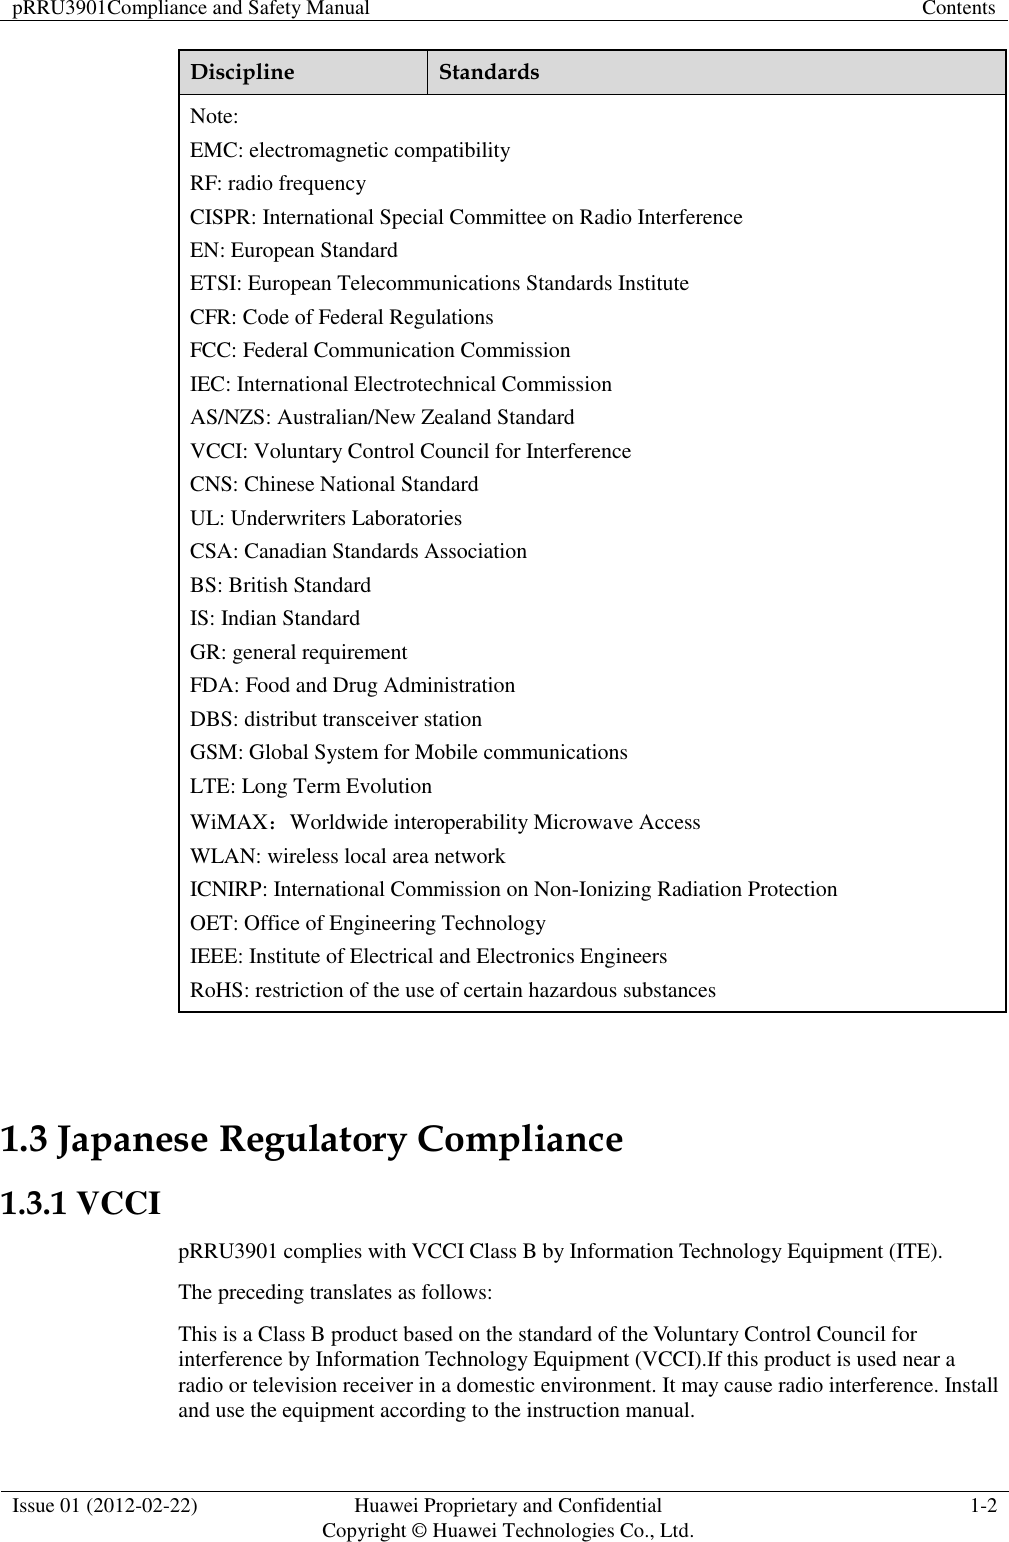 pRRU3901Compliance and Safety Manual Contents  Issue 01 (2012-02-22) Huawei Proprietary and Confidential           Copyright © Huawei Technologies Co., Ltd. 1-2  Discipline Standards Note: EMC: electromagnetic compatibility RF: radio frequency CISPR: International Special Committee on Radio Interference EN: European Standard ETSI: European Telecommunications Standards Institute CFR: Code of Federal Regulations FCC: Federal Communication Commission IEC: International Electrotechnical Commission AS/NZS: Australian/New Zealand Standard VCCI: Voluntary Control Council for Interference CNS: Chinese National Standard UL: Underwriters Laboratories CSA: Canadian Standards Association BS: British Standard IS: Indian Standard GR: general requirement FDA: Food and Drug Administration DBS: distribut transceiver station GSM: Global System for Mobile communications LTE: Long Term Evolution WiMAX：Worldwide interoperability Microwave Access WLAN: wireless local area network ICNIRP: International Commission on Non-Ionizing Radiation Protection OET: Office of Engineering Technology IEEE: Institute of Electrical and Electronics Engineers RoHS: restriction of the use of certain hazardous substances  1.3 Japanese Regulatory Compliance 1.3.1 VCCI pRRU3901 complies with VCCI Class B by Information Technology Equipment (ITE). The preceding translates as follows: This is a Class B product based on the standard of the Voluntary Control Council for interference by Information Technology Equipment (VCCI).If this product is used near a radio or television receiver in a domestic environment. It may cause radio interference. Install and use the equipment according to the instruction manual. 